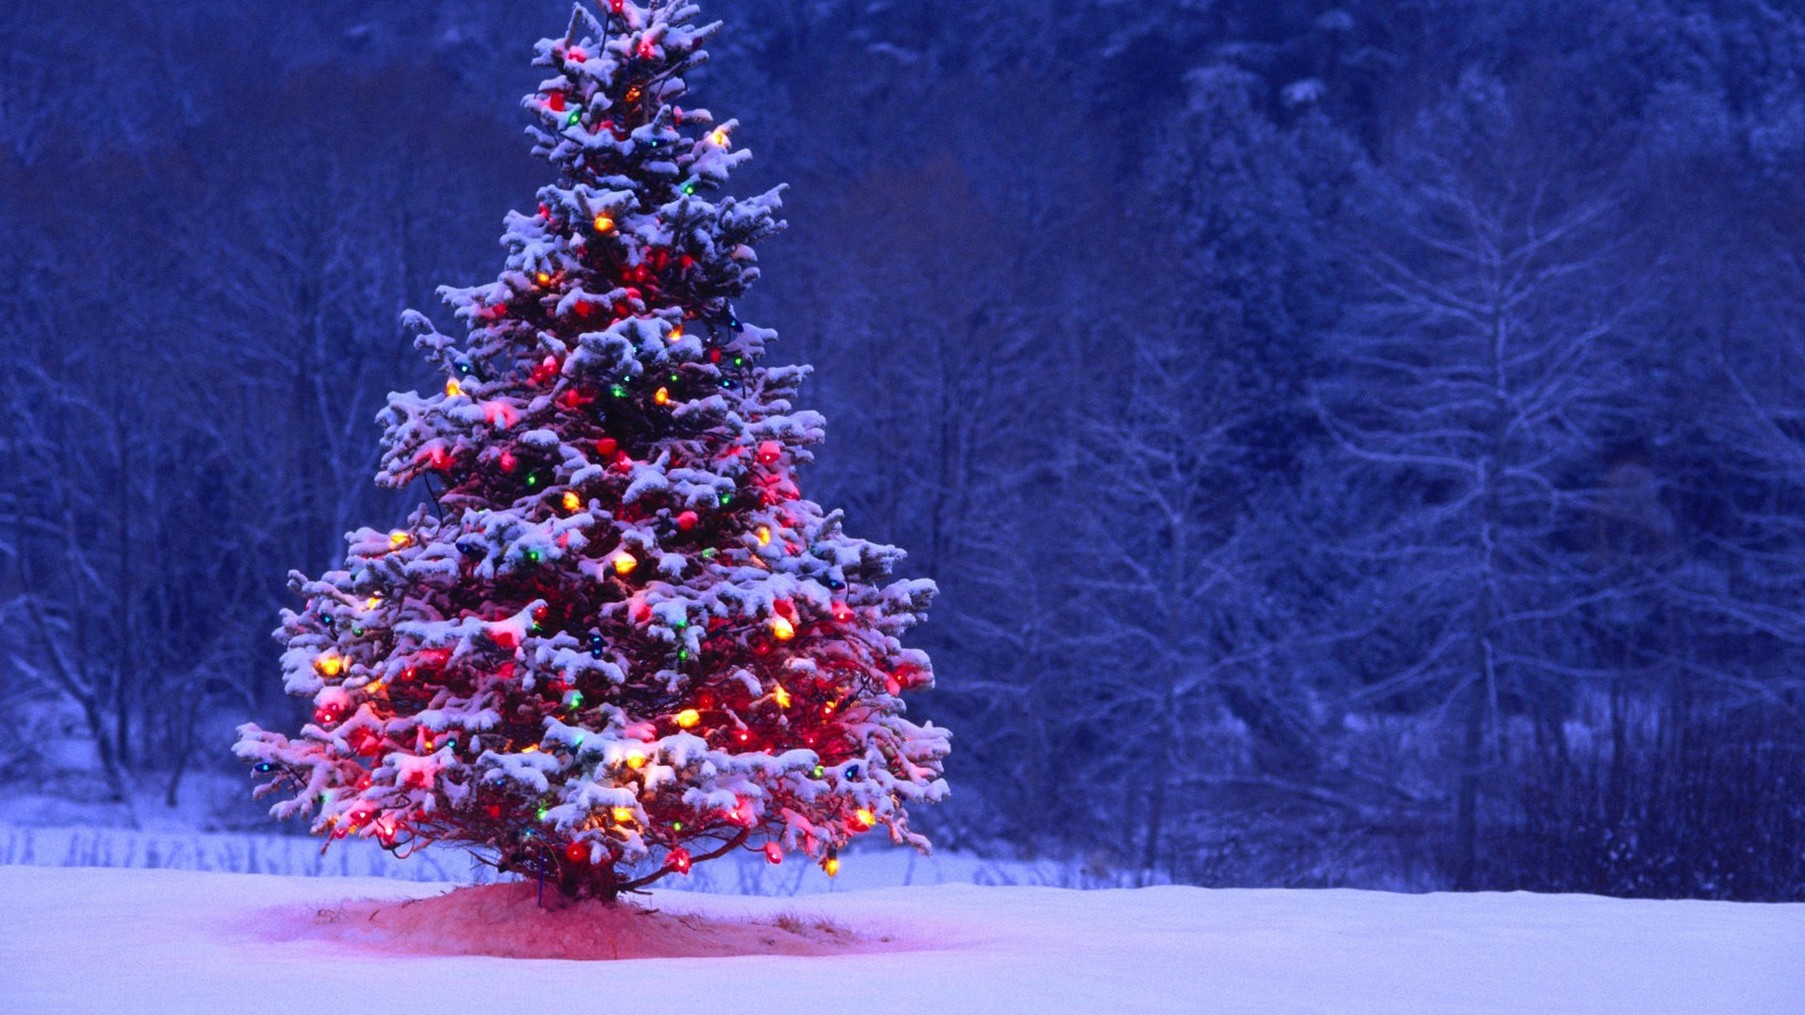 Lighted Christmas Tree On The Snowy Ground Wallpaper